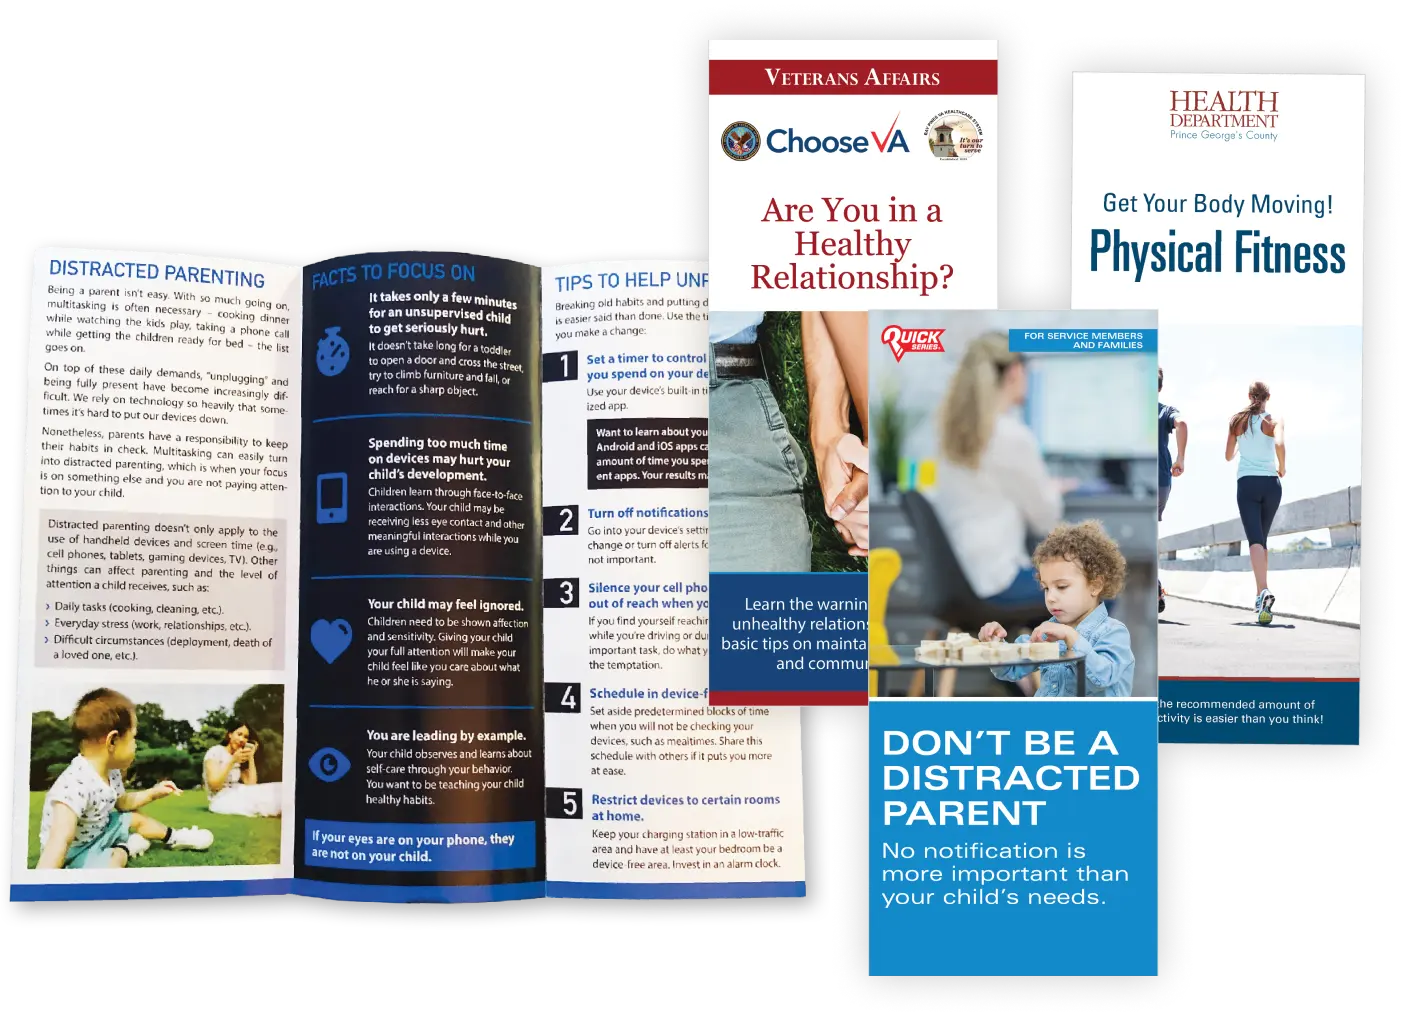 A set of quickseries pamphlets including the covers of the Are you in a healthy relationship VA trifold, the cover and the inside preview of Don’t be a distracted parent for service members and families and get your body moving!